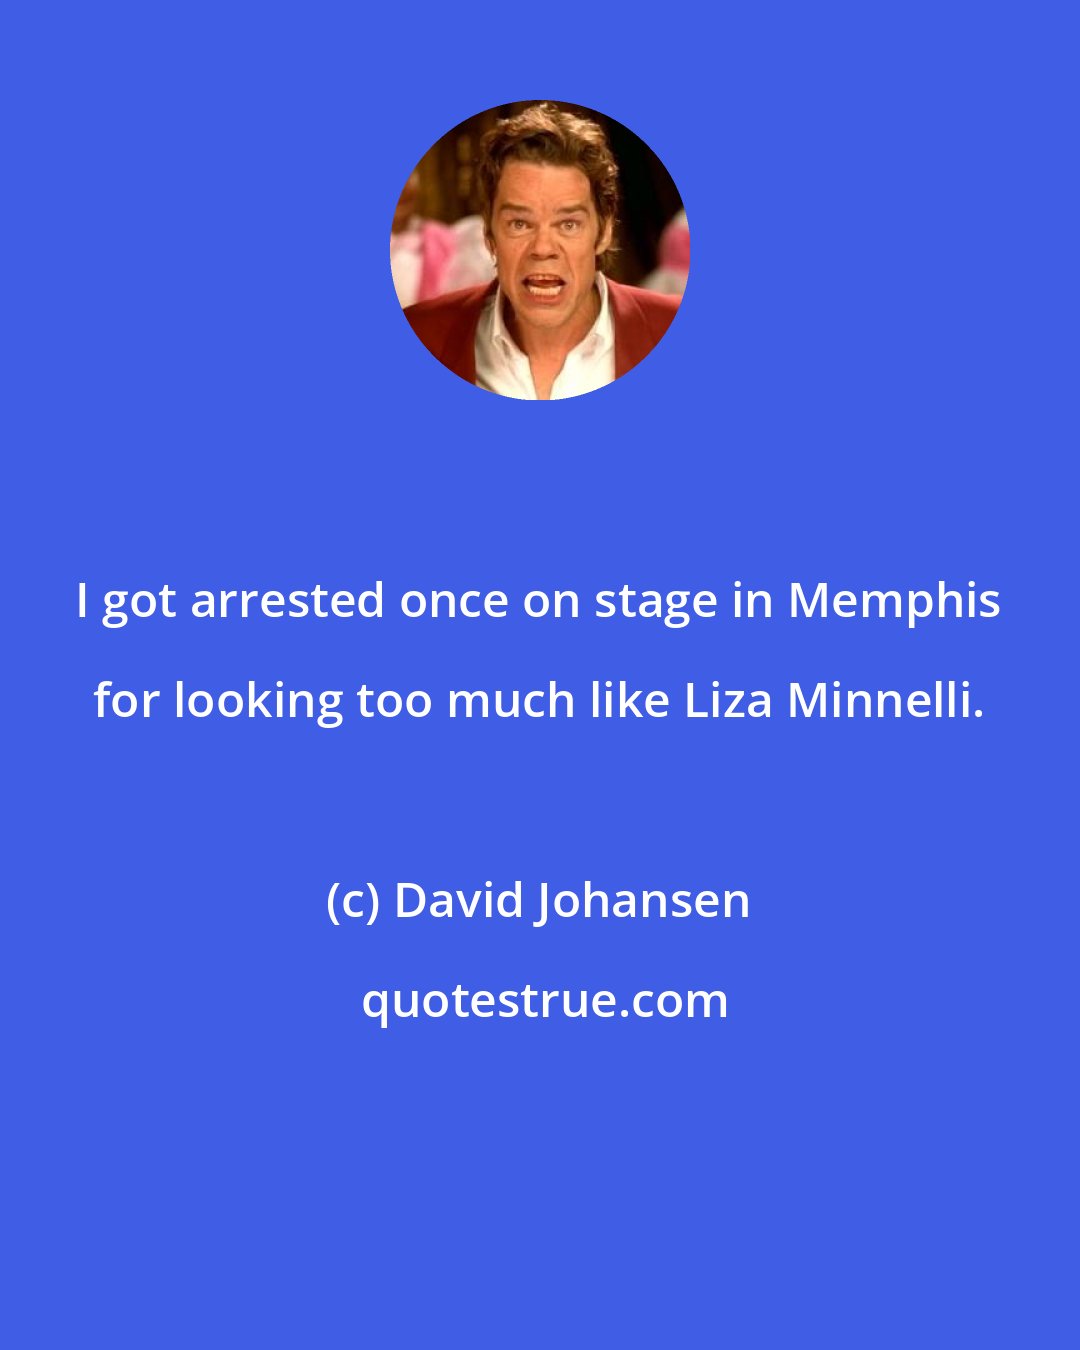 David Johansen: I got arrested once on stage in Memphis for looking too much like Liza Minnelli.